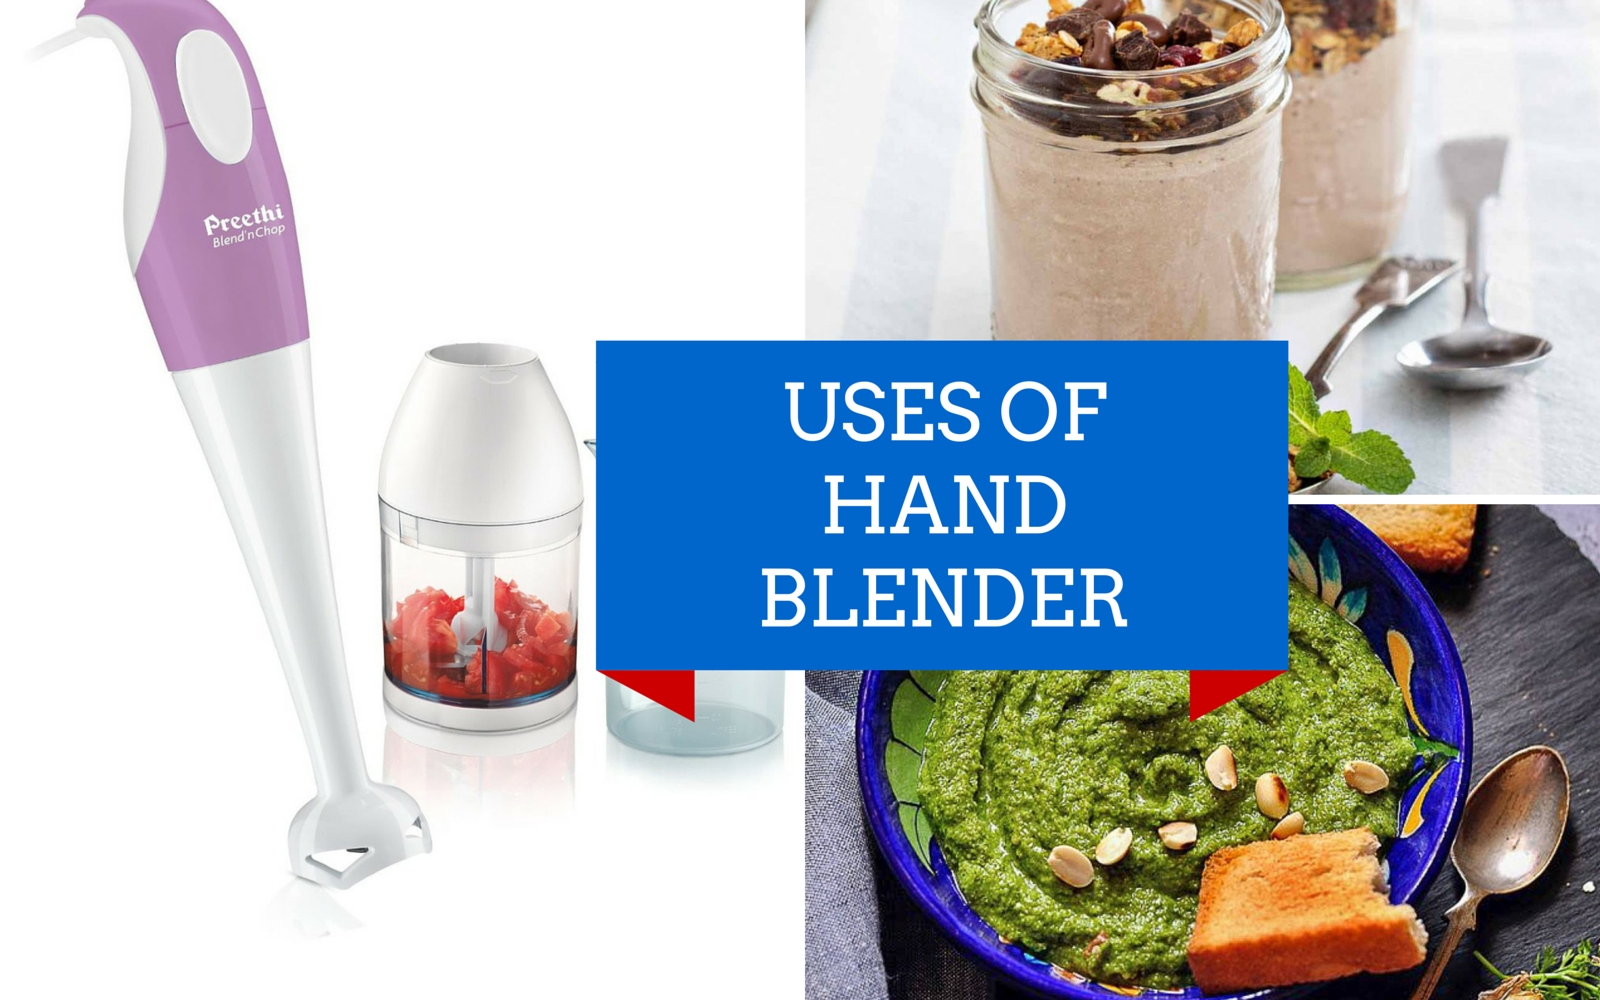 WHEN TO USE A HAND BLENDER?